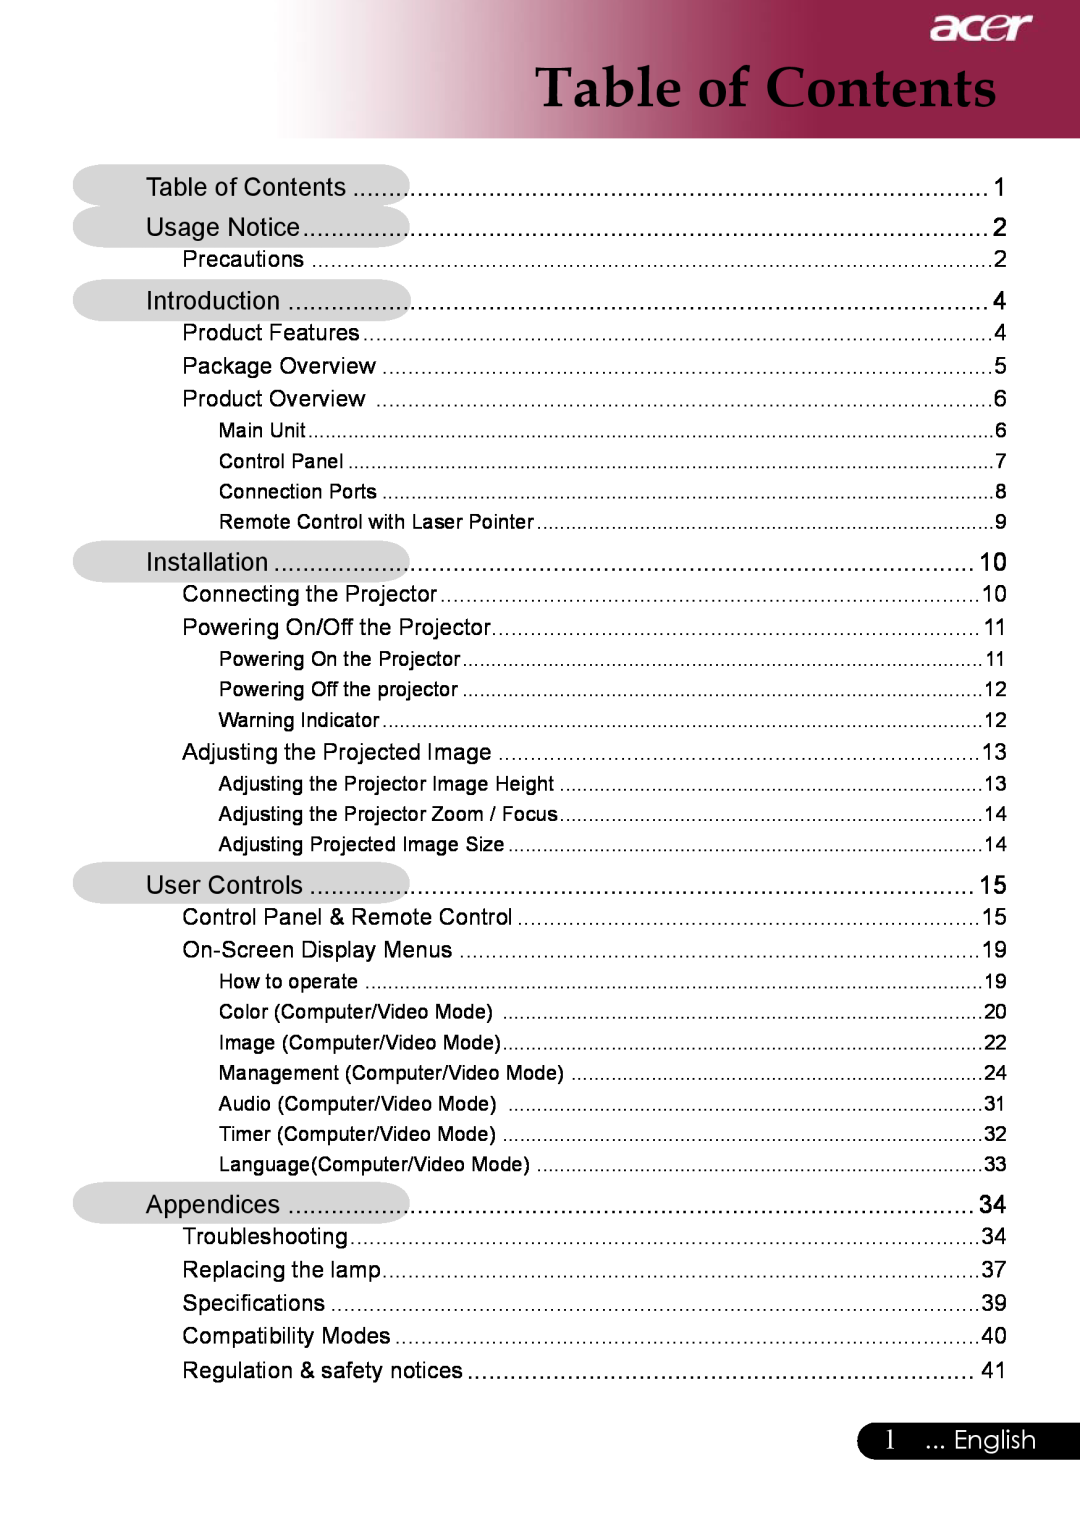 Acer PD311, PD323 manual Table of Contents, English 